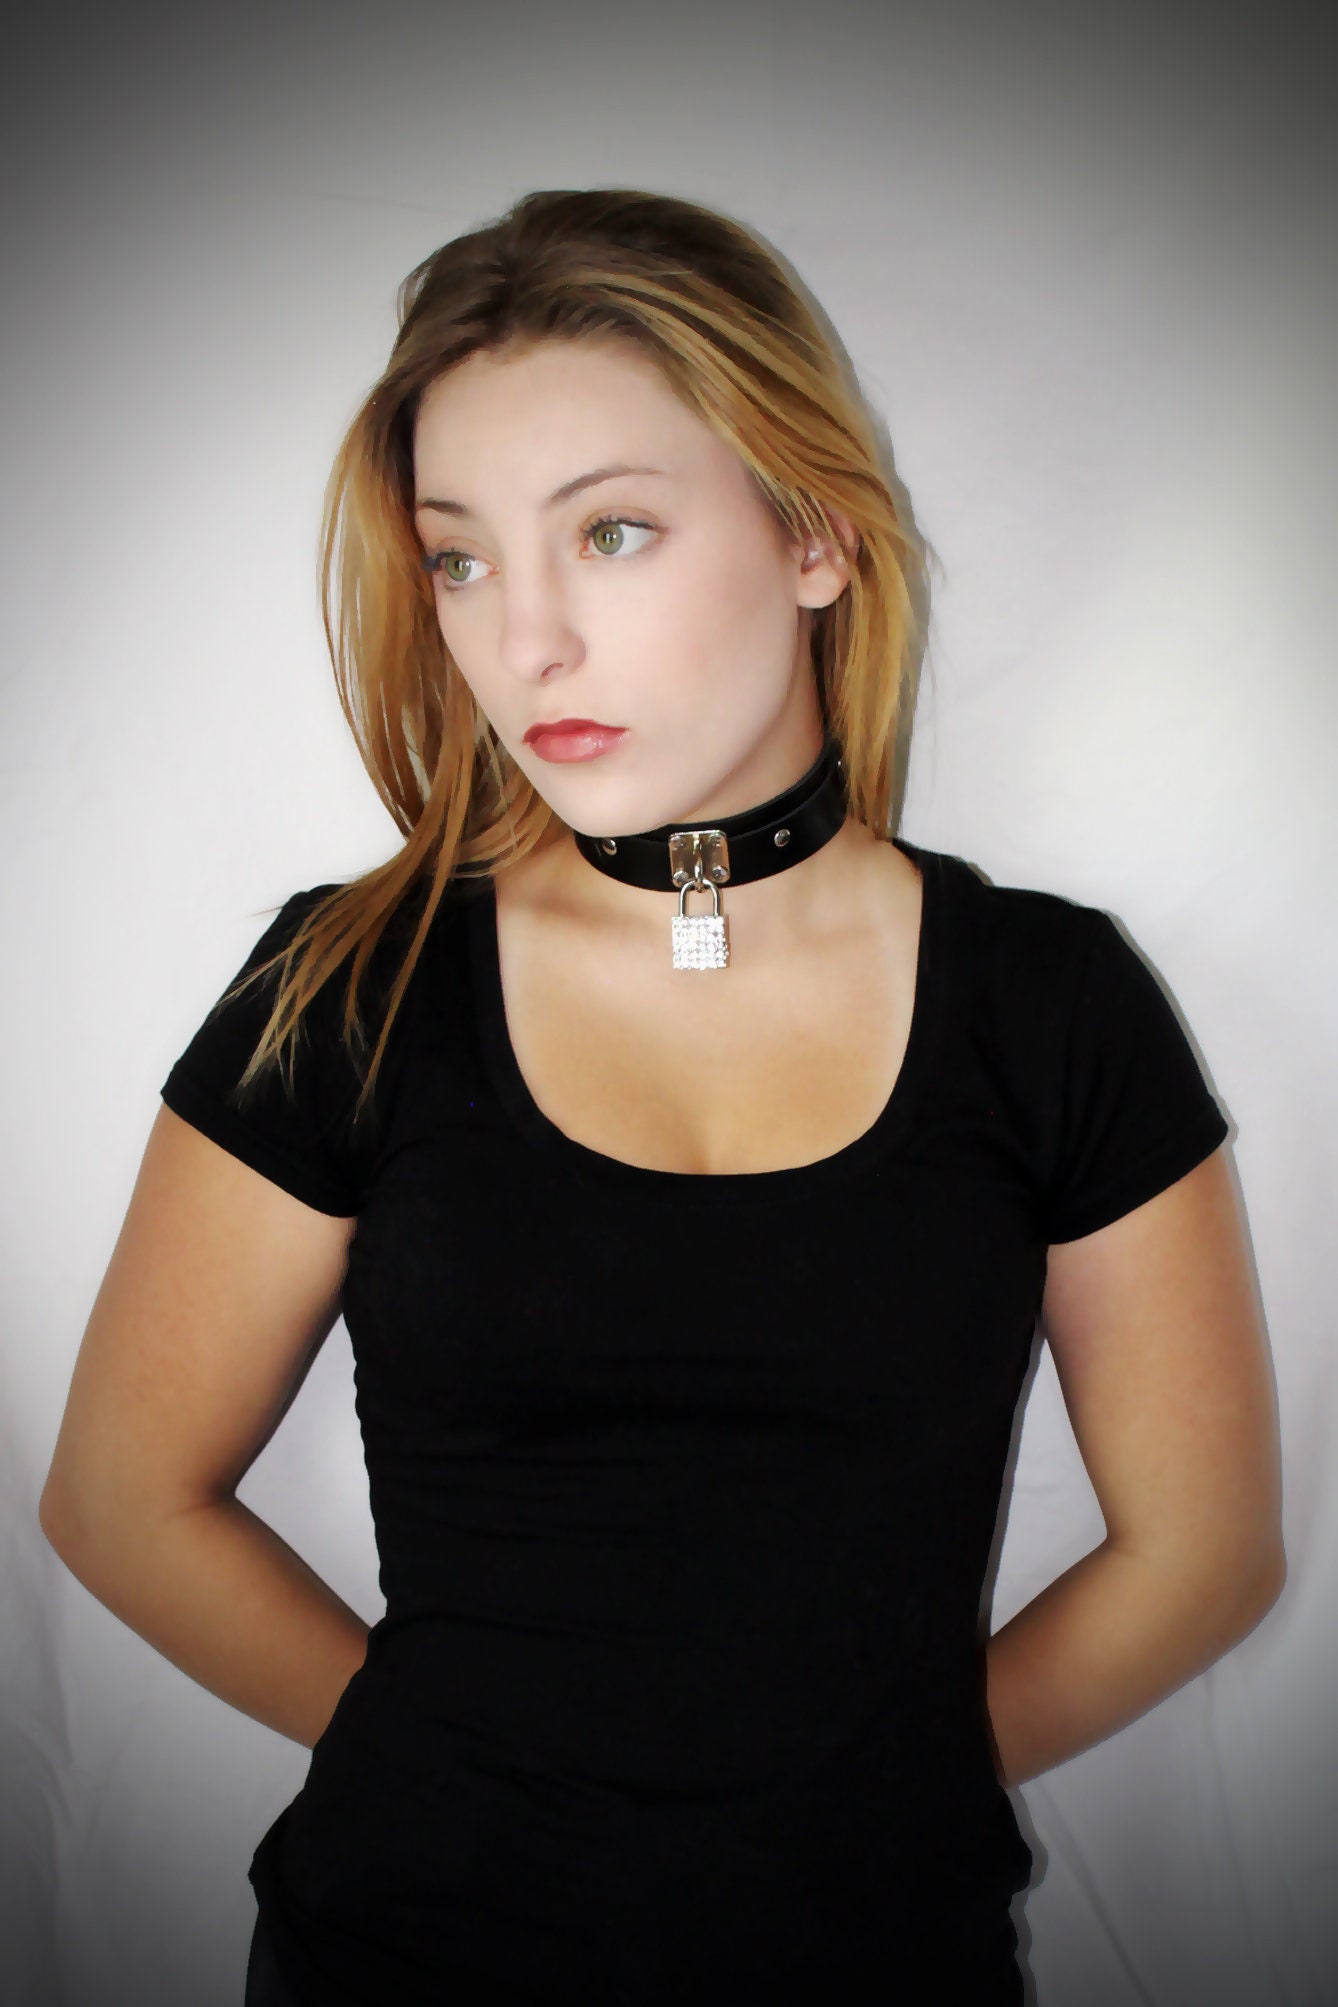 Cloud7 - Doesn't every girl love a beautiful new necklace? New Collar  Central Park from genuine braided leather